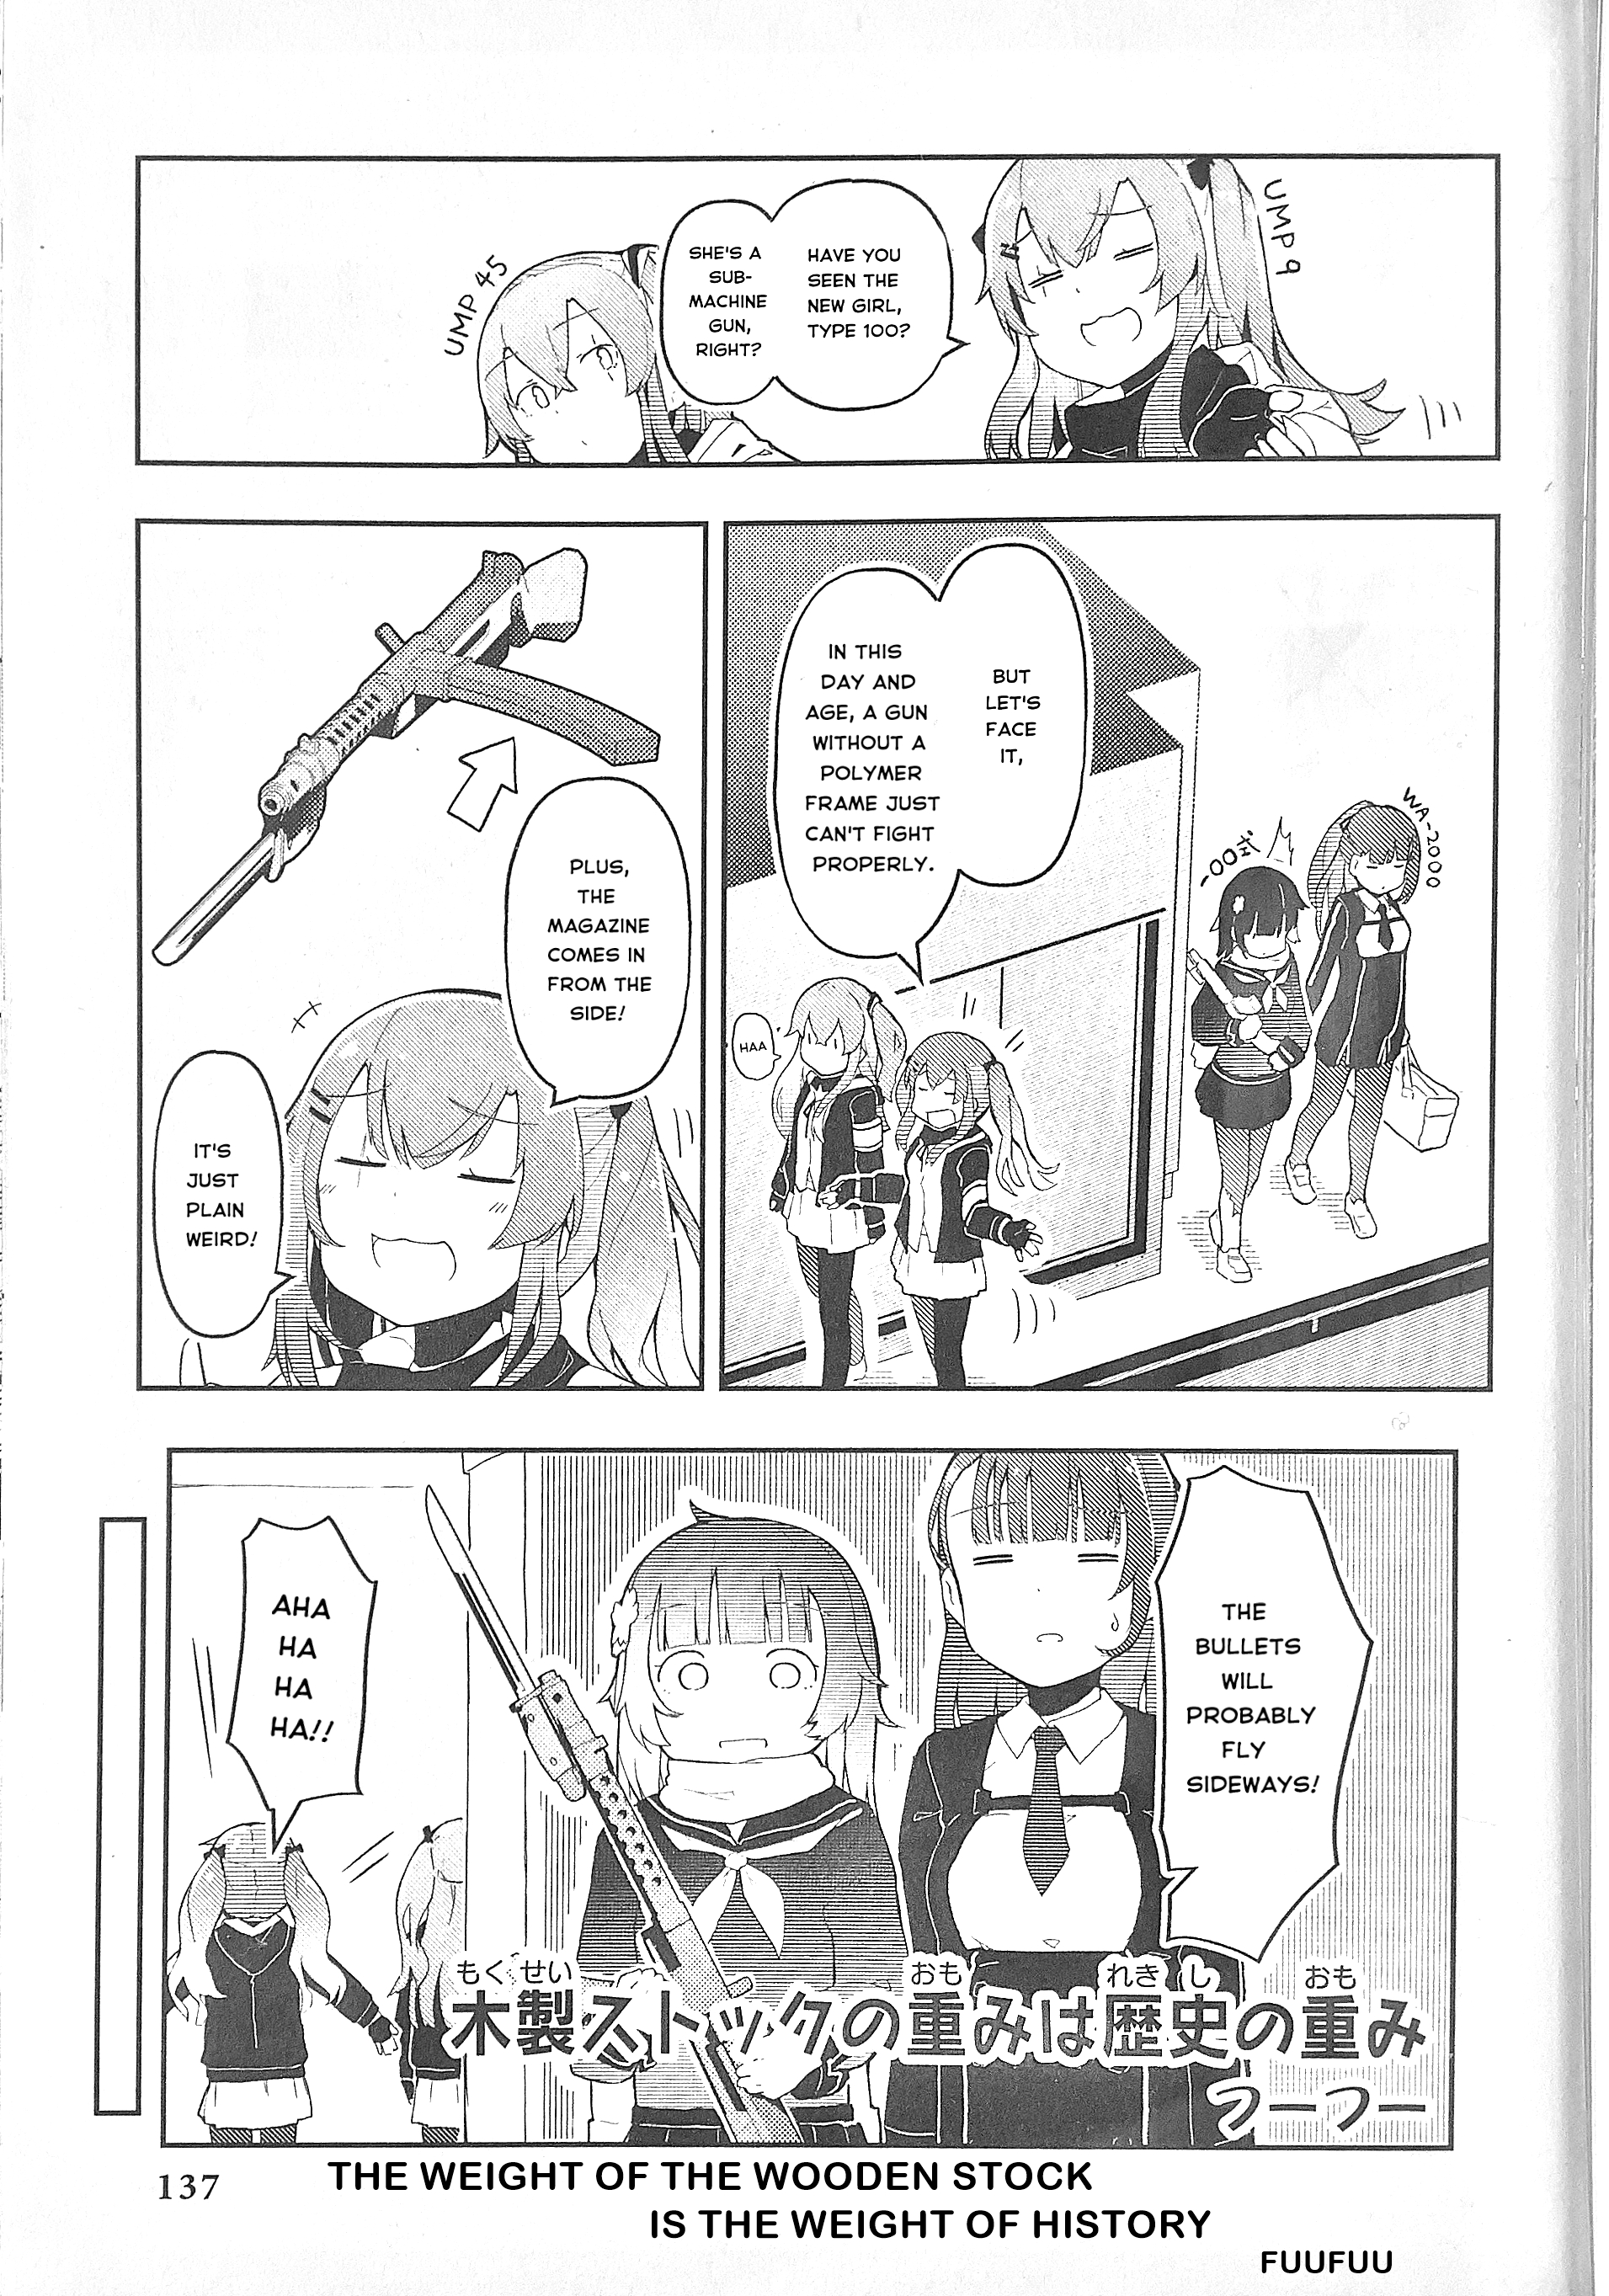 Dolls Frontline Comic Anthology - DNA Media 2019 - Chapter 15100 - The Weight of the Wooden Stock is the Weight of History! - Image 1